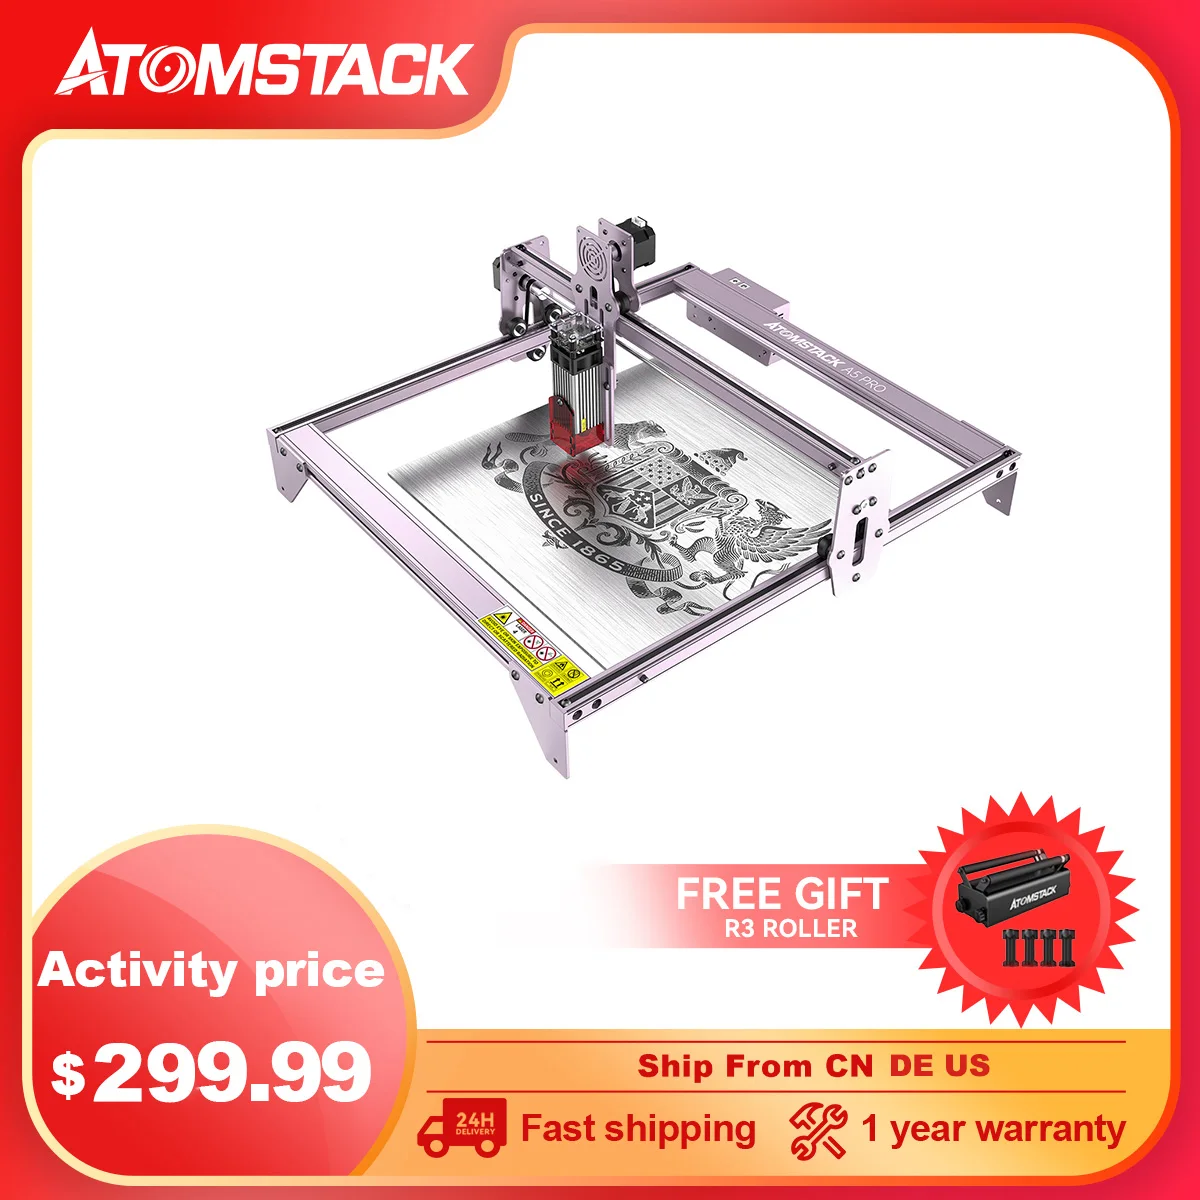 

ATOMSTACK A5 PRO 40W Laser Engraver + Rotary Roller Laser Engraving Machine Mark On Cans,Eggs,Cylinders,Bottle,Pen